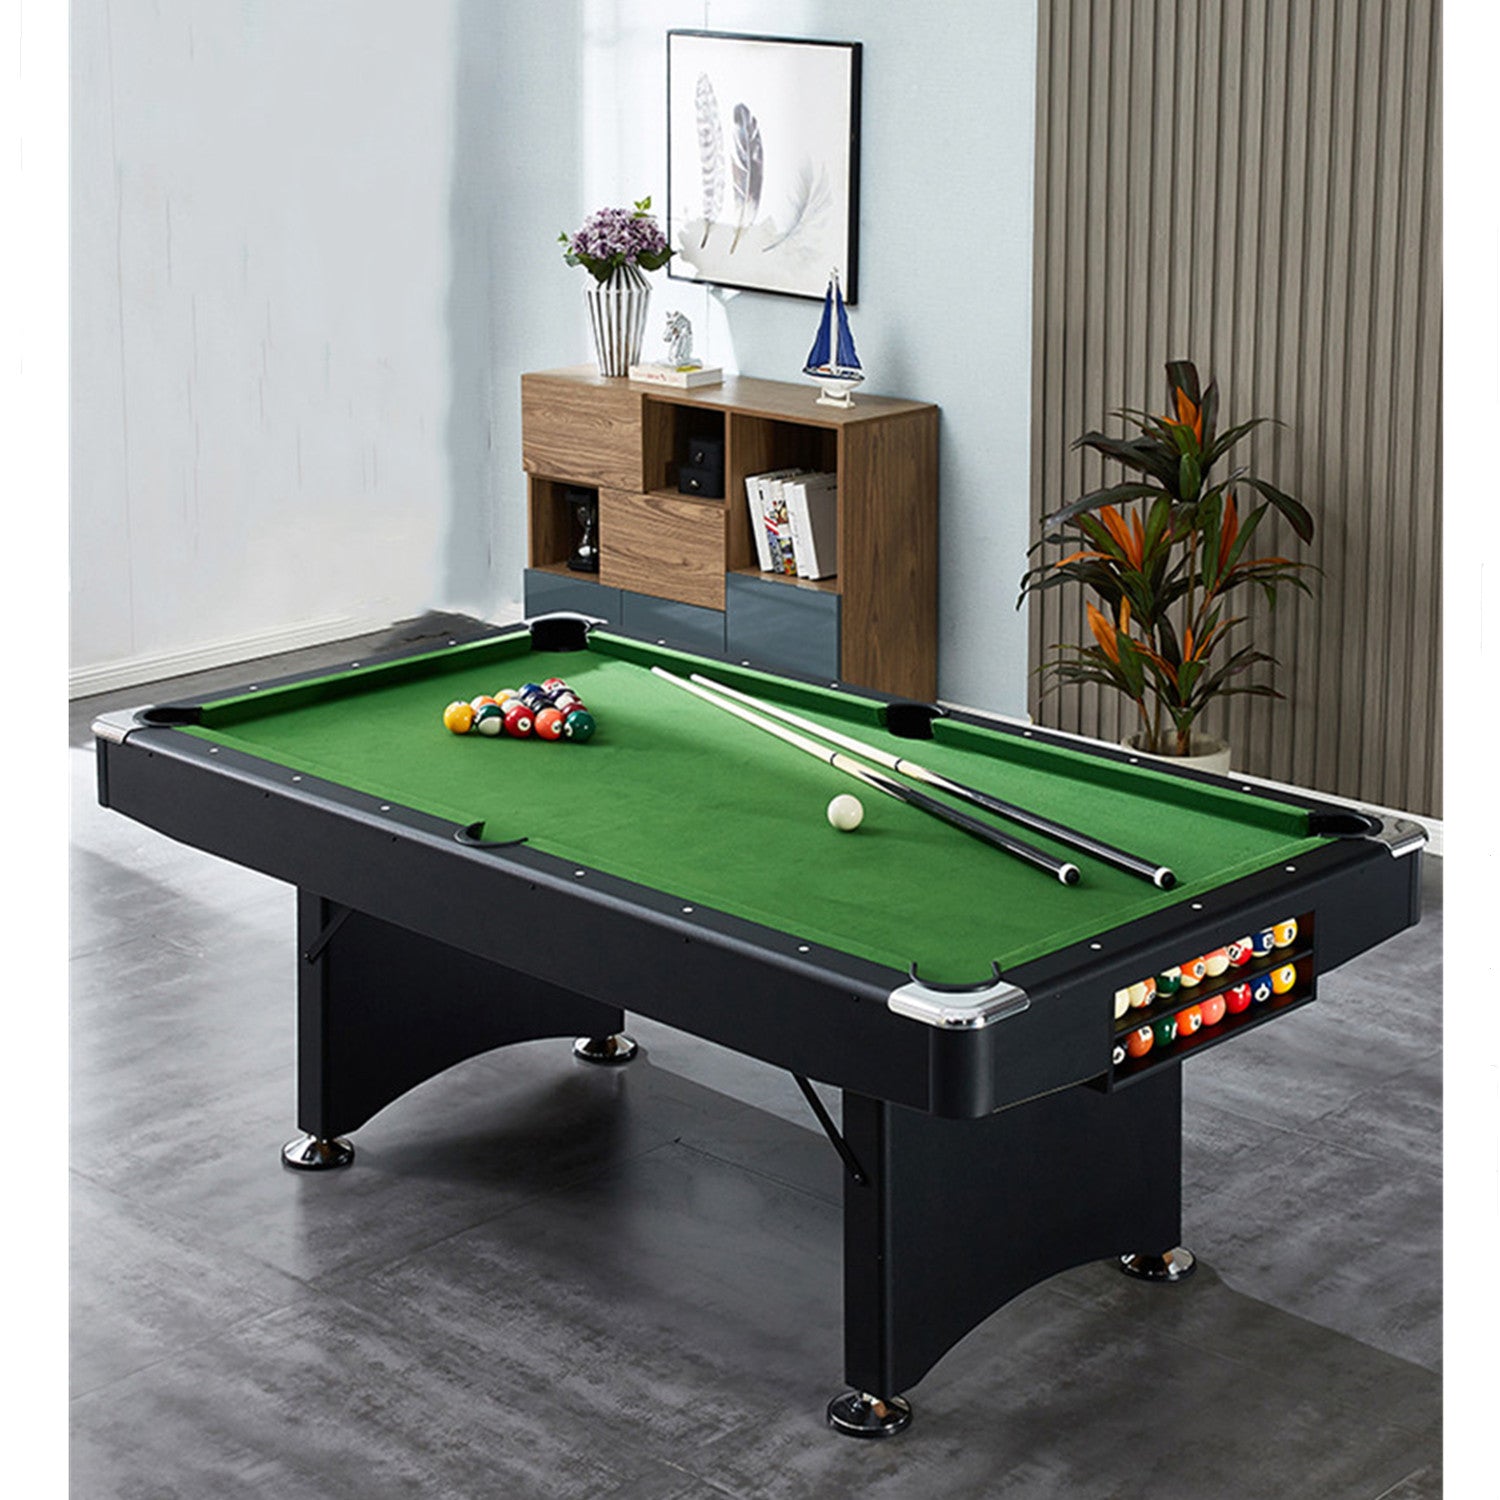 Winner 7FT Dining Pool Table-3IN1 Foldable|No Assembly Required